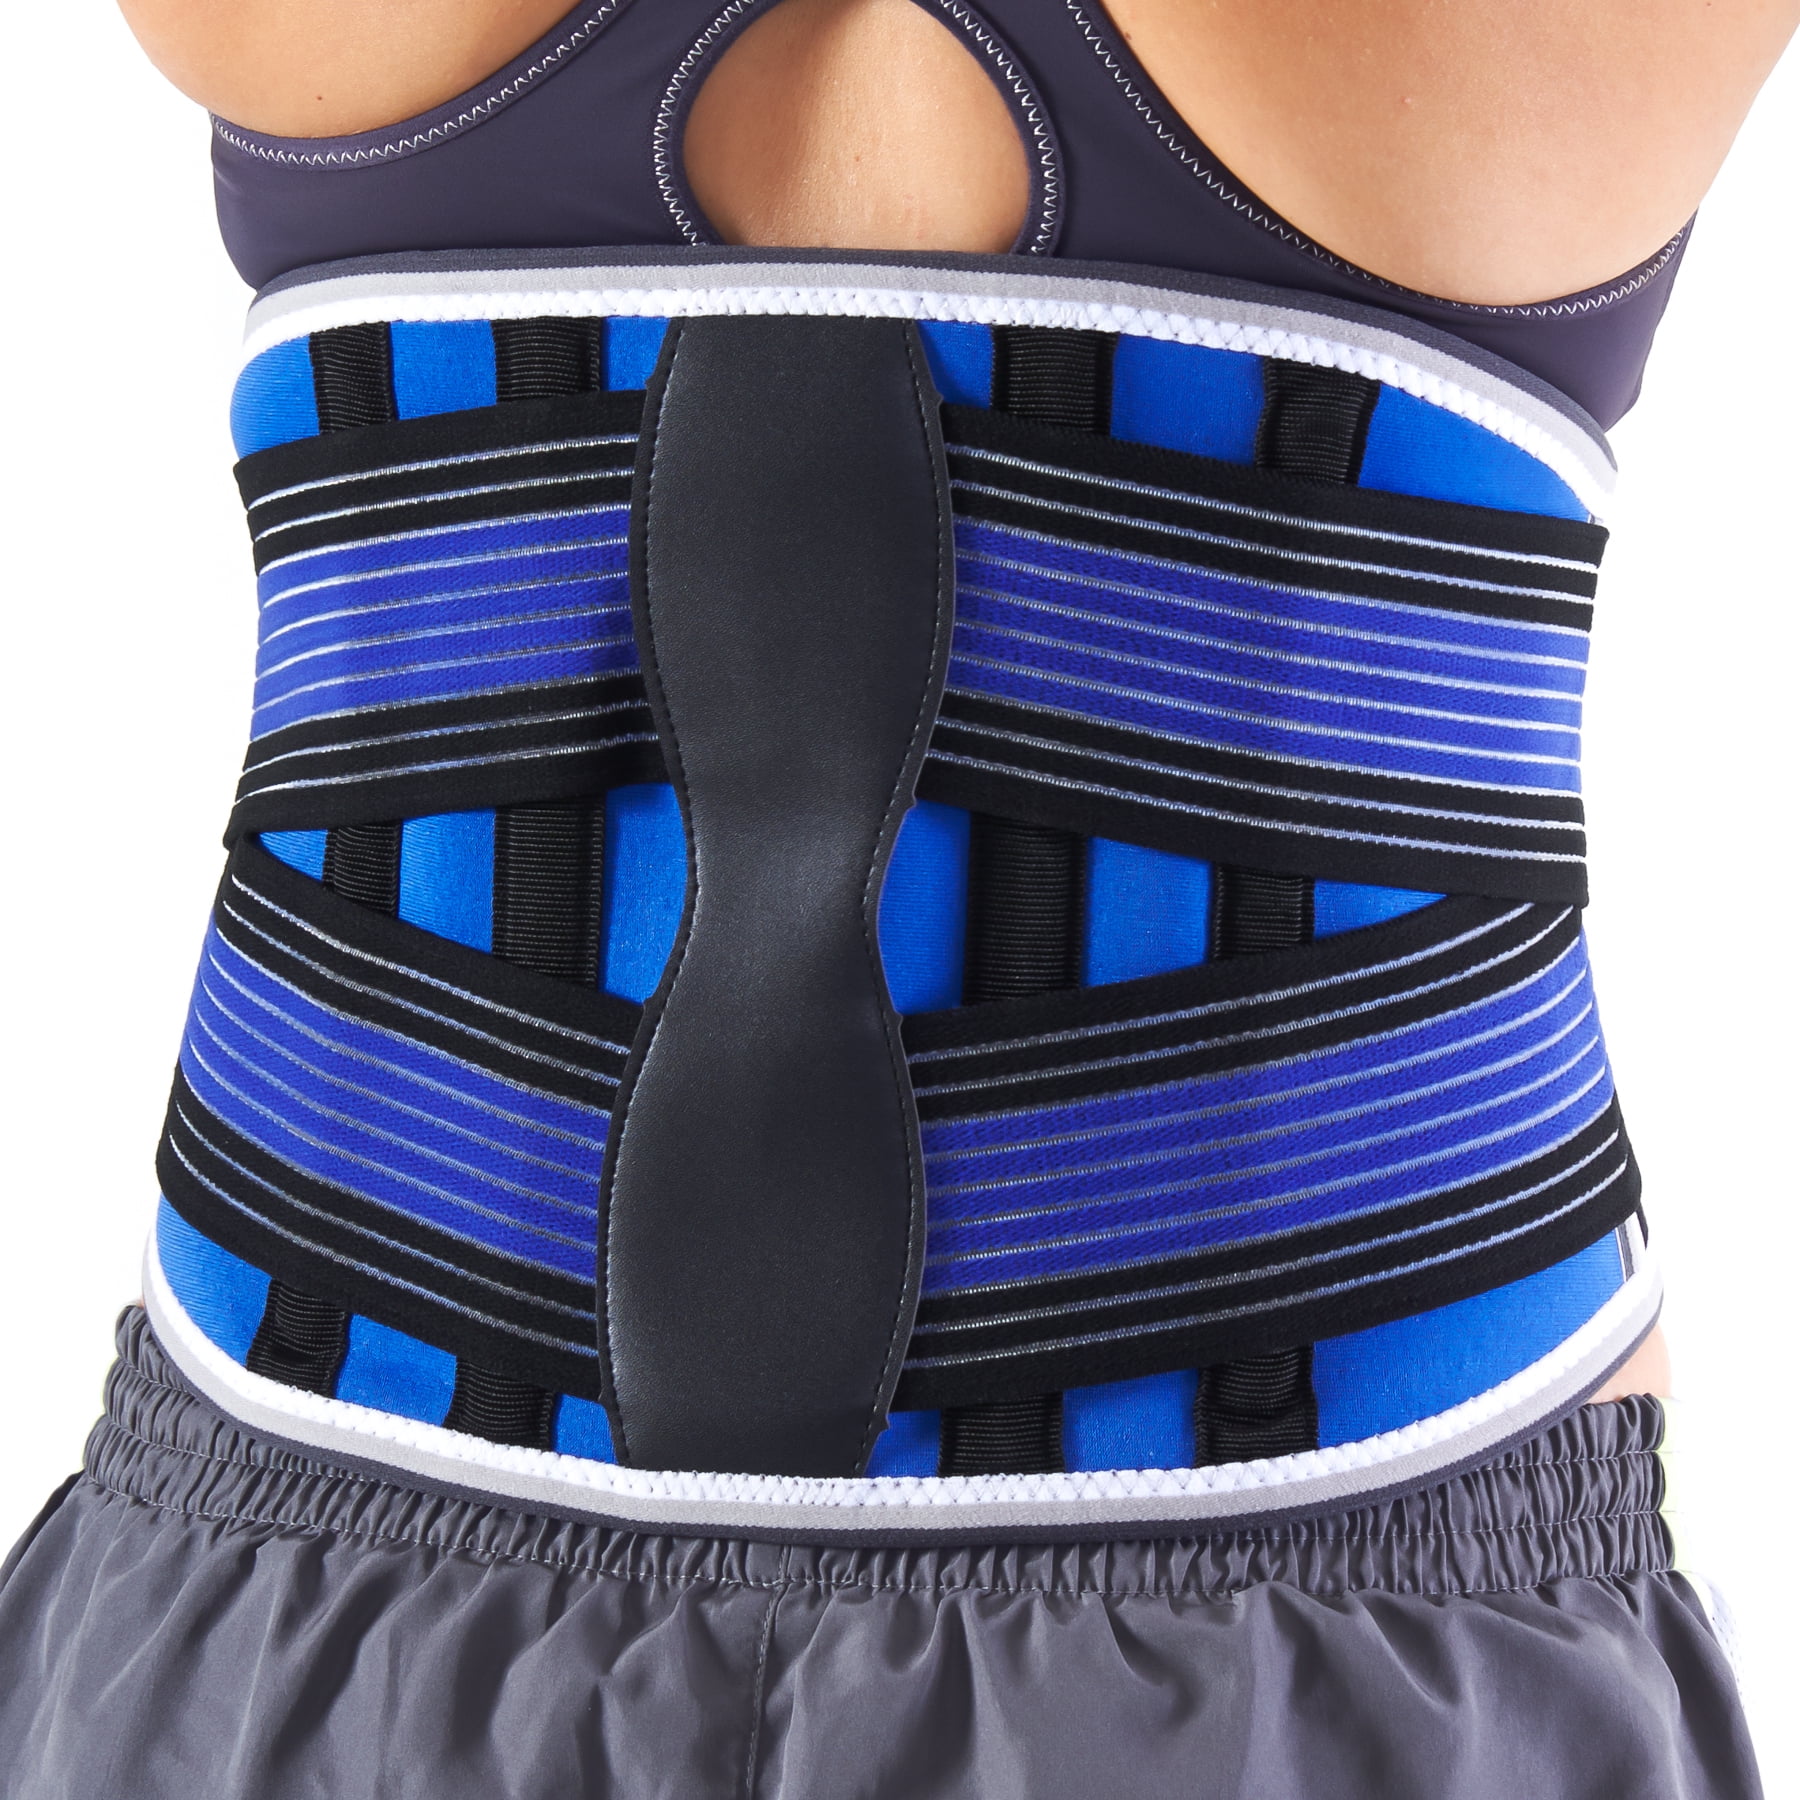 Design and fashion enthusiasm Lumbar Support Belt Lumbosacral Back Brace –  Ergonomic Design and Breathable Material - Xs/S Black, backpain support